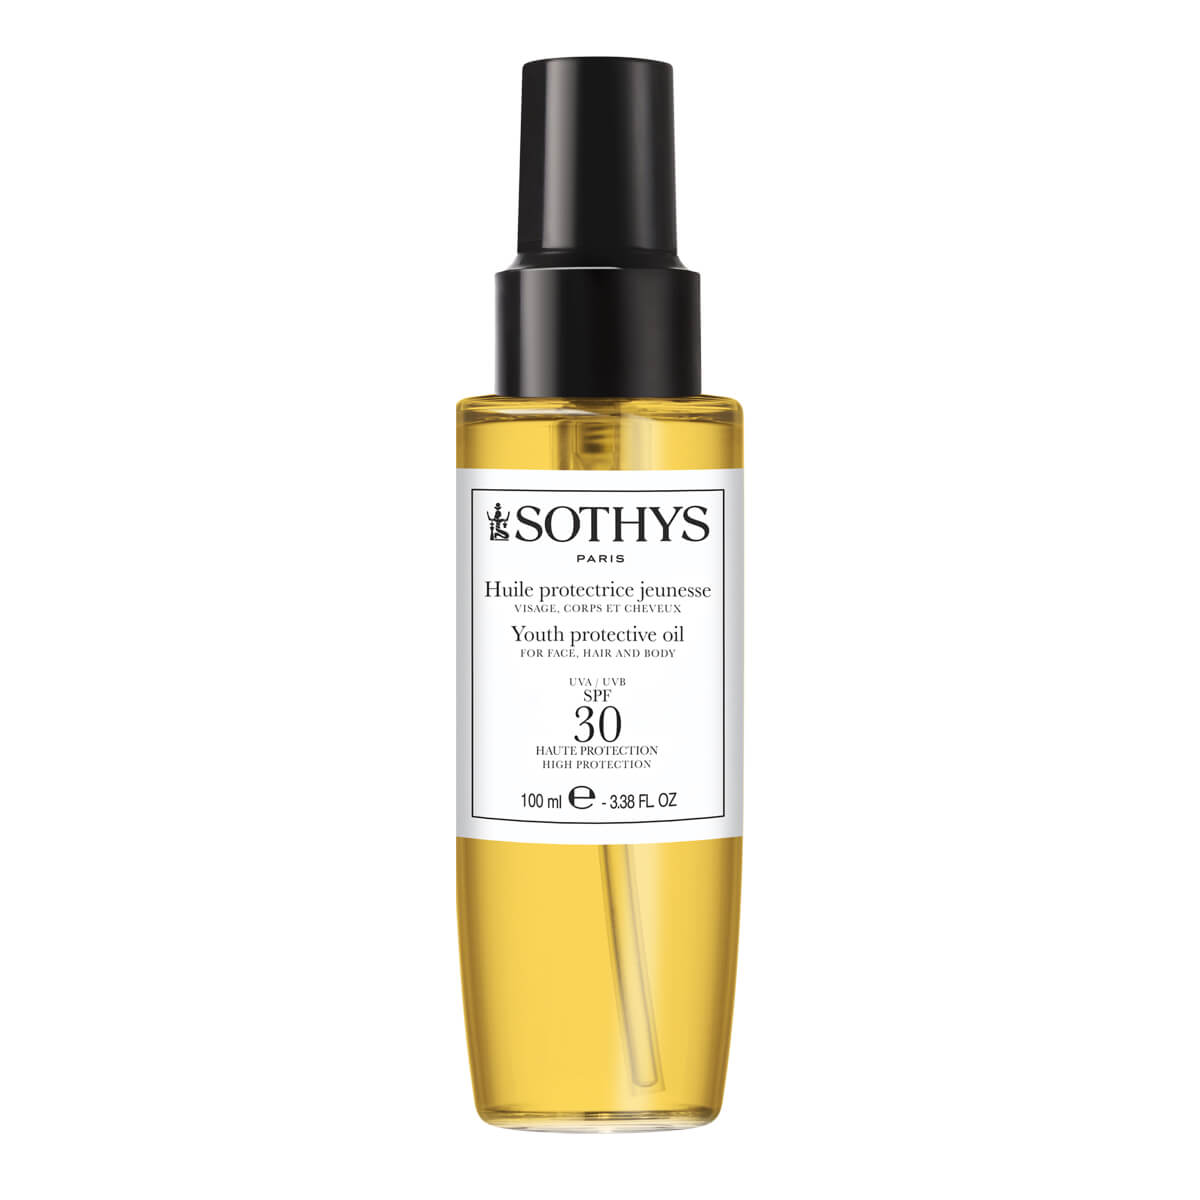 Sothys Youth Protective Oil SPF30 High Protection – Face, Body & Hair